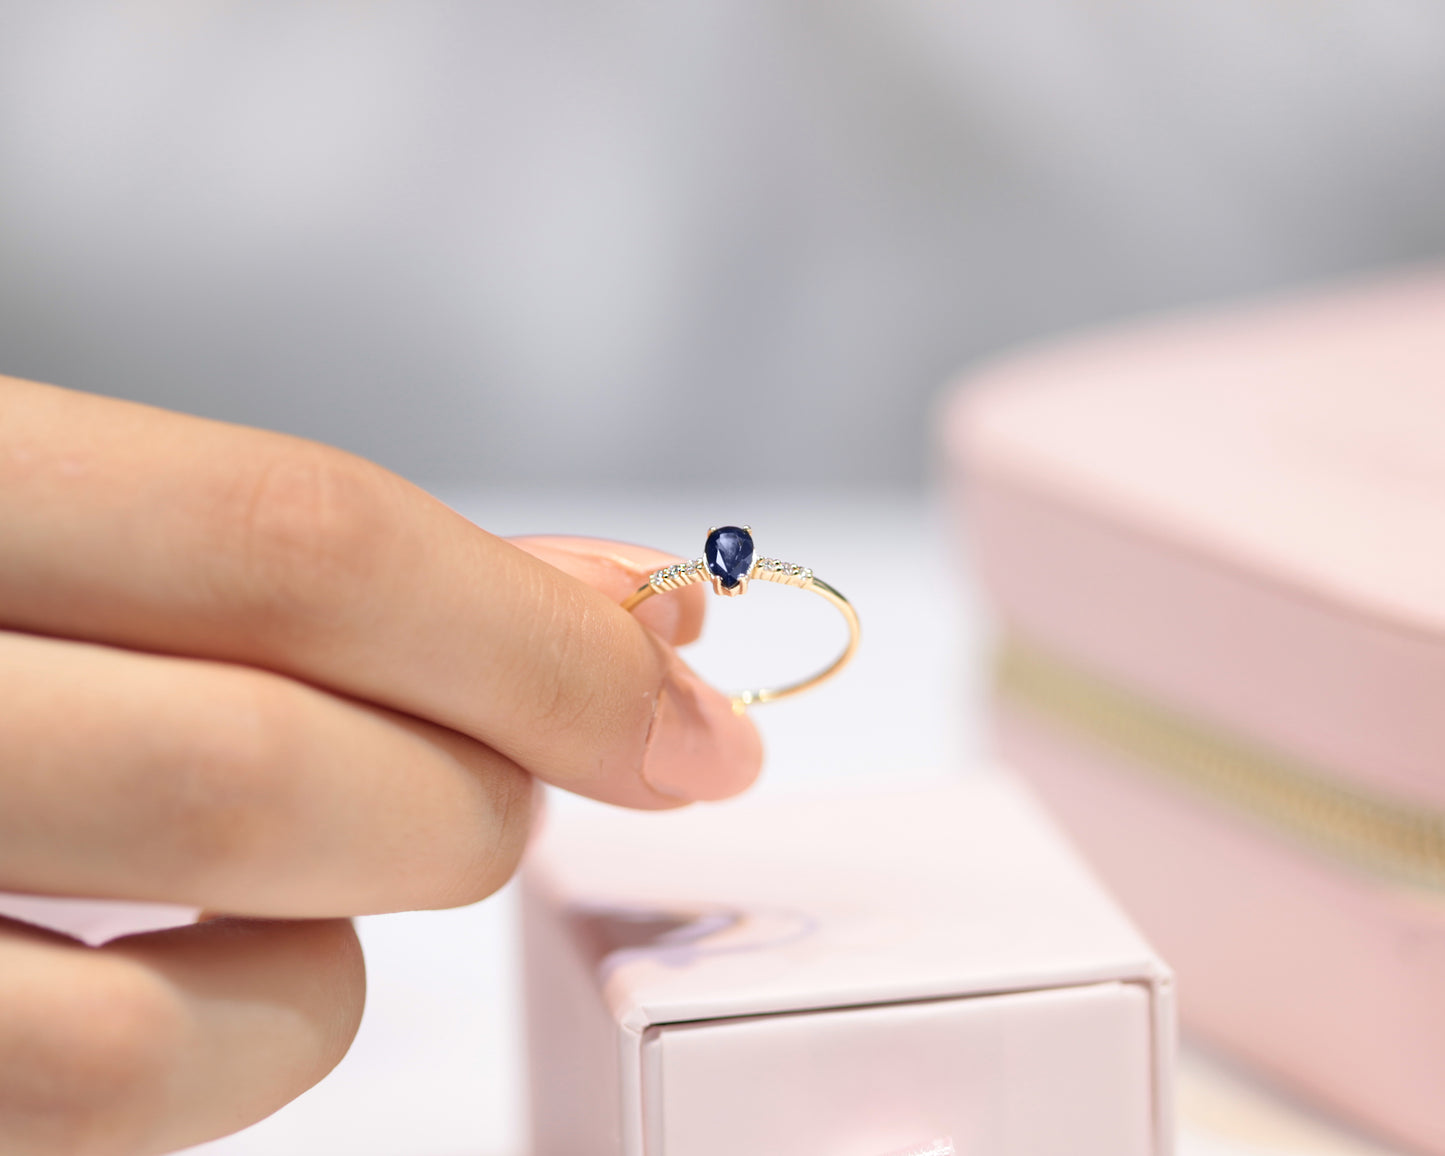 Dainty Ring, Sapphire Pear cut with Sprinkled Diamonds, 14K Gold